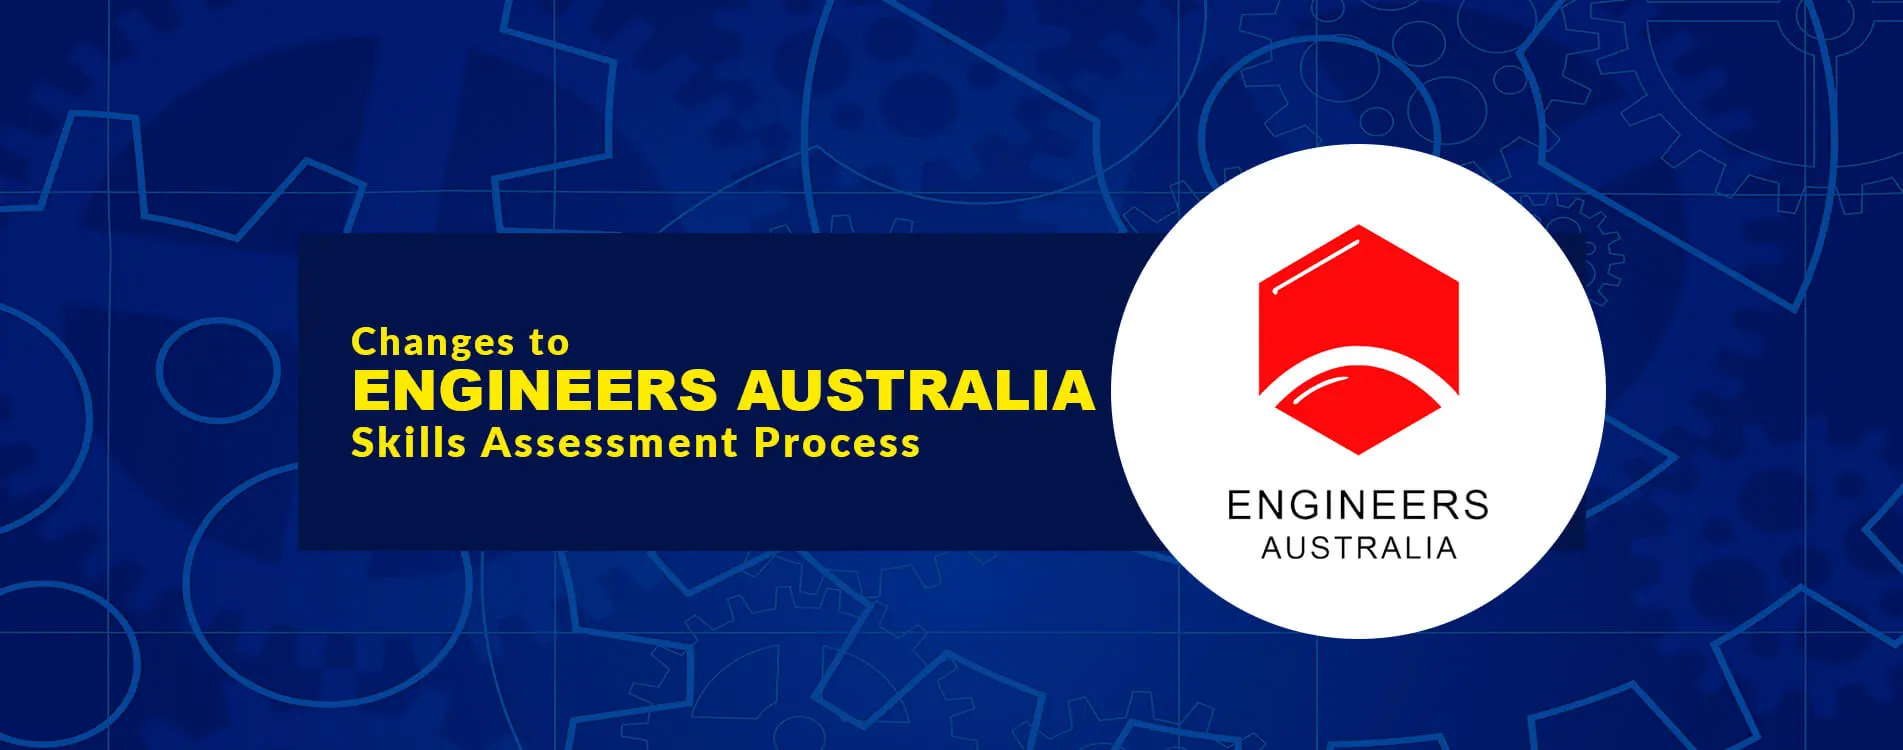 New user-friendly changes introduced to skills assessment process of engineers Australia (EA)